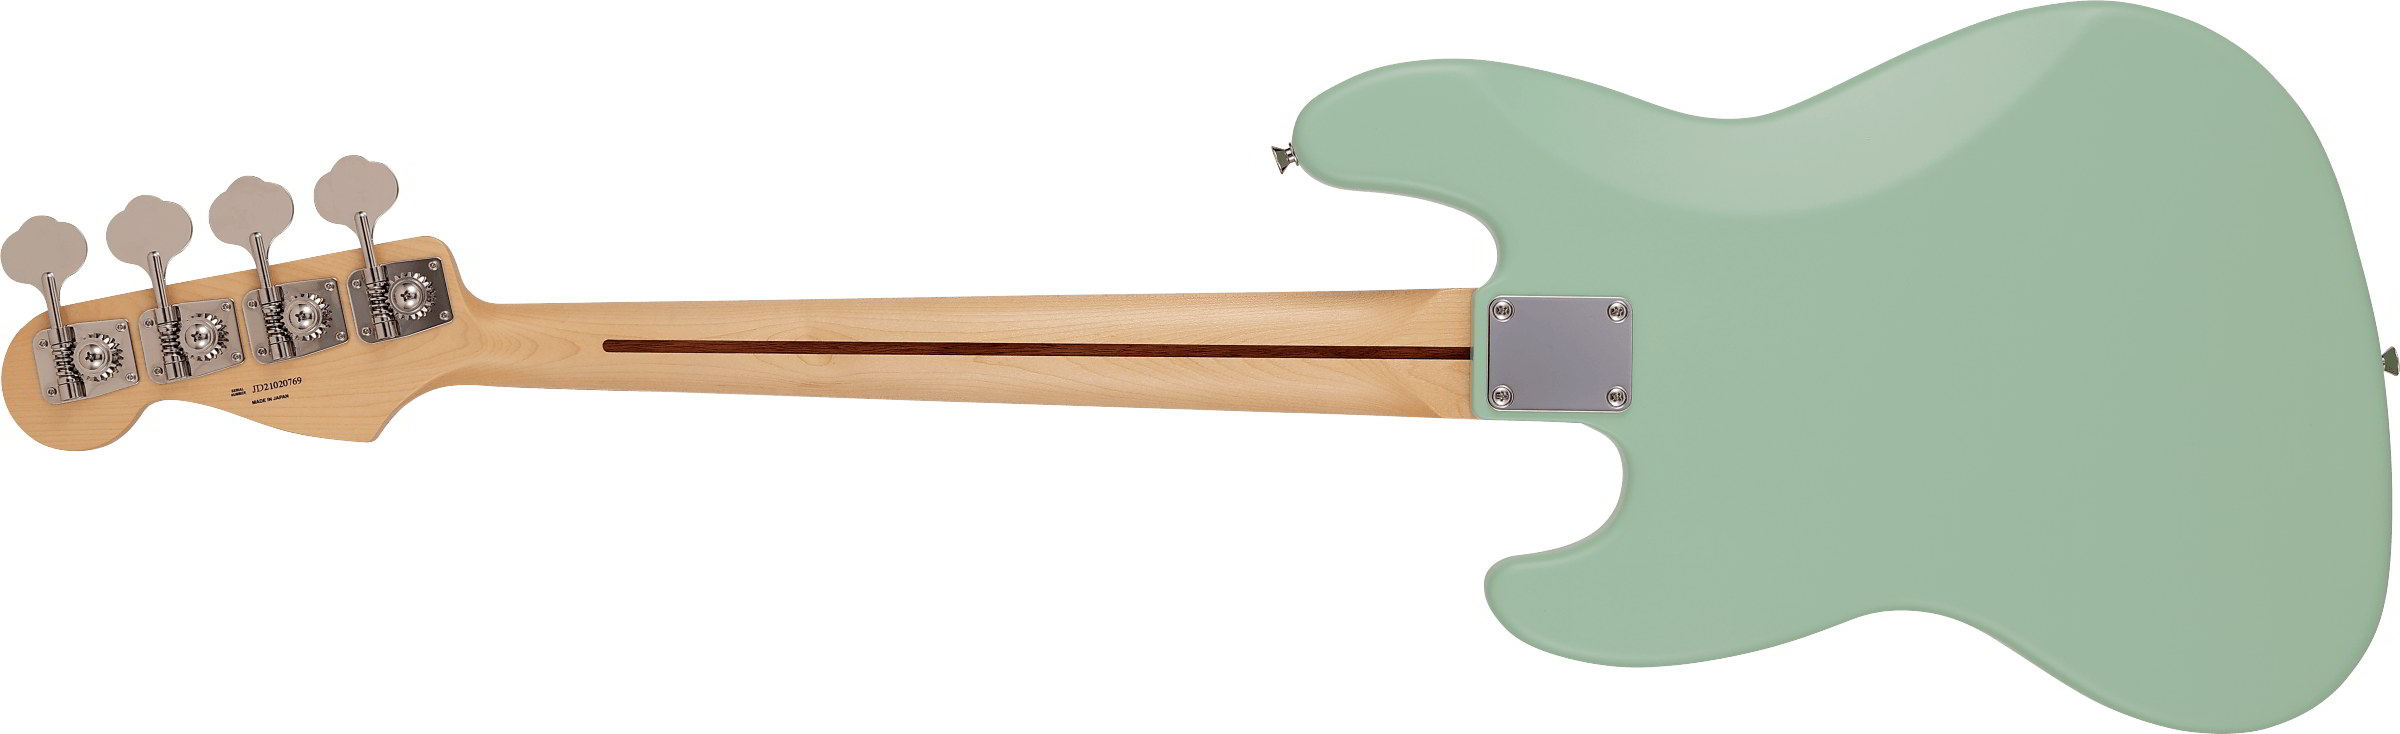 Made in Japan Junior Collection Jazz Bass®, Rosewood Fingerboard, Satin Surf Green追加画像